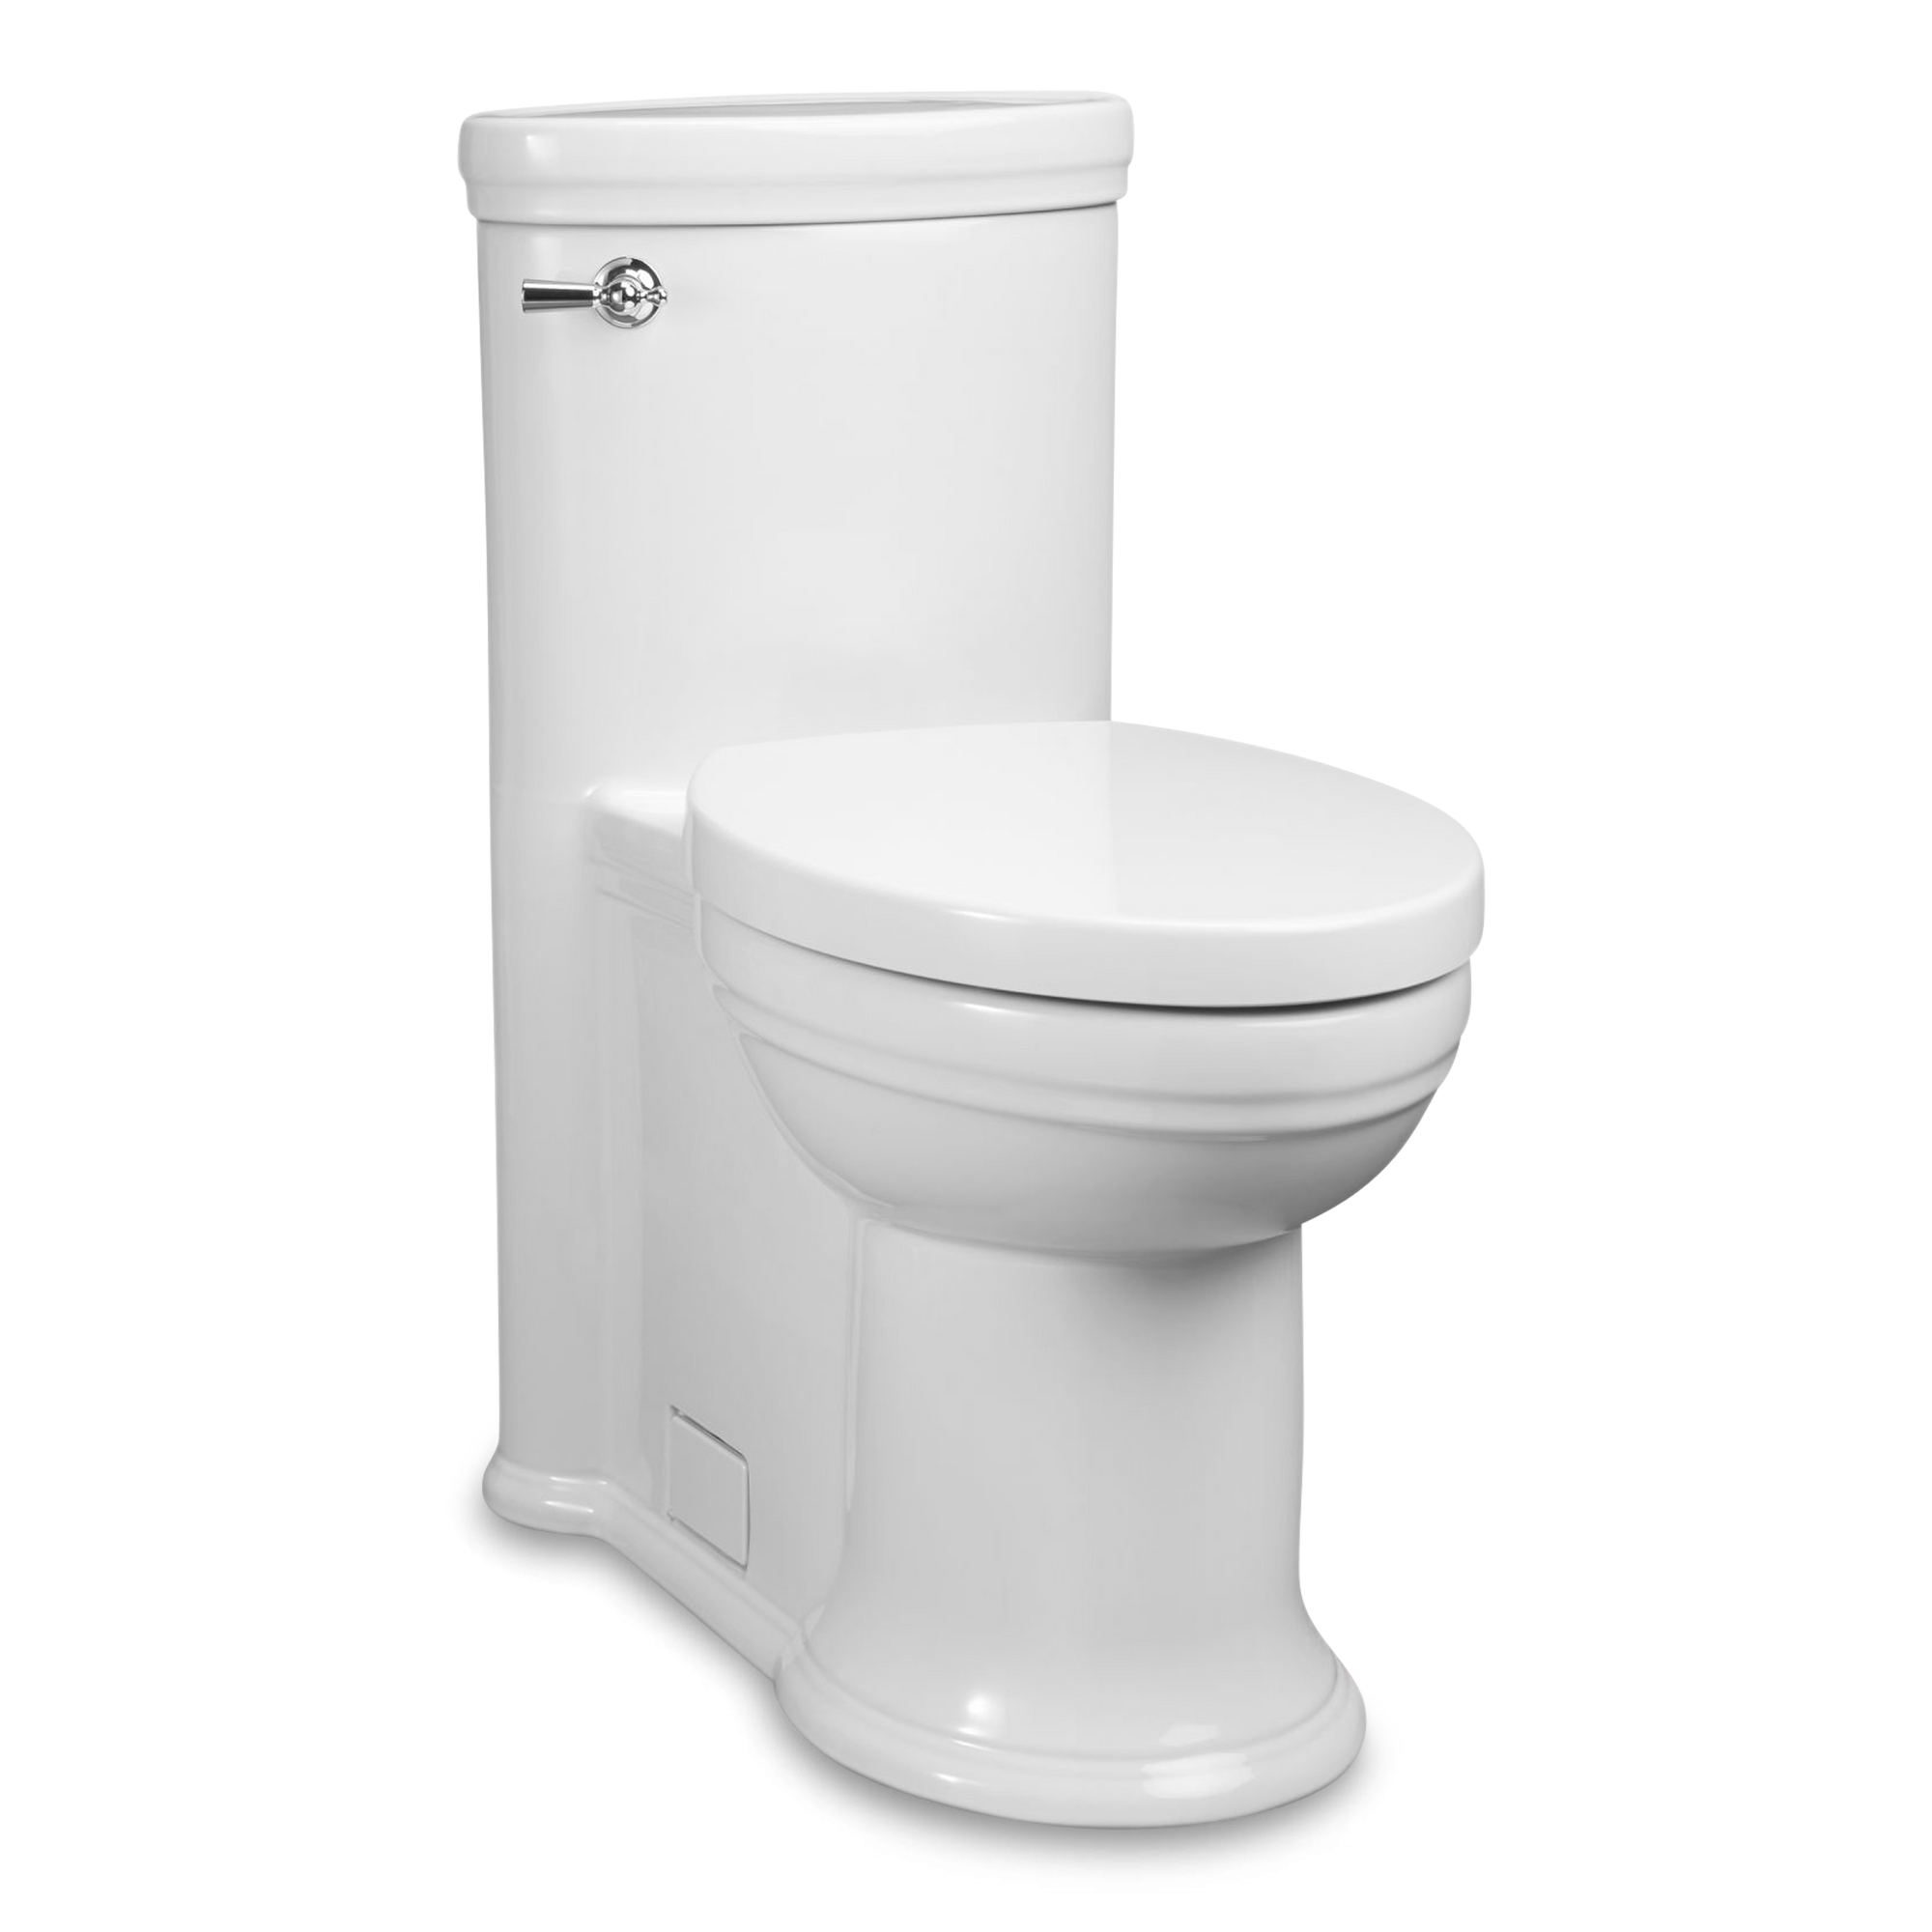 A transitional style one-piece toilet with Slow Close seat.